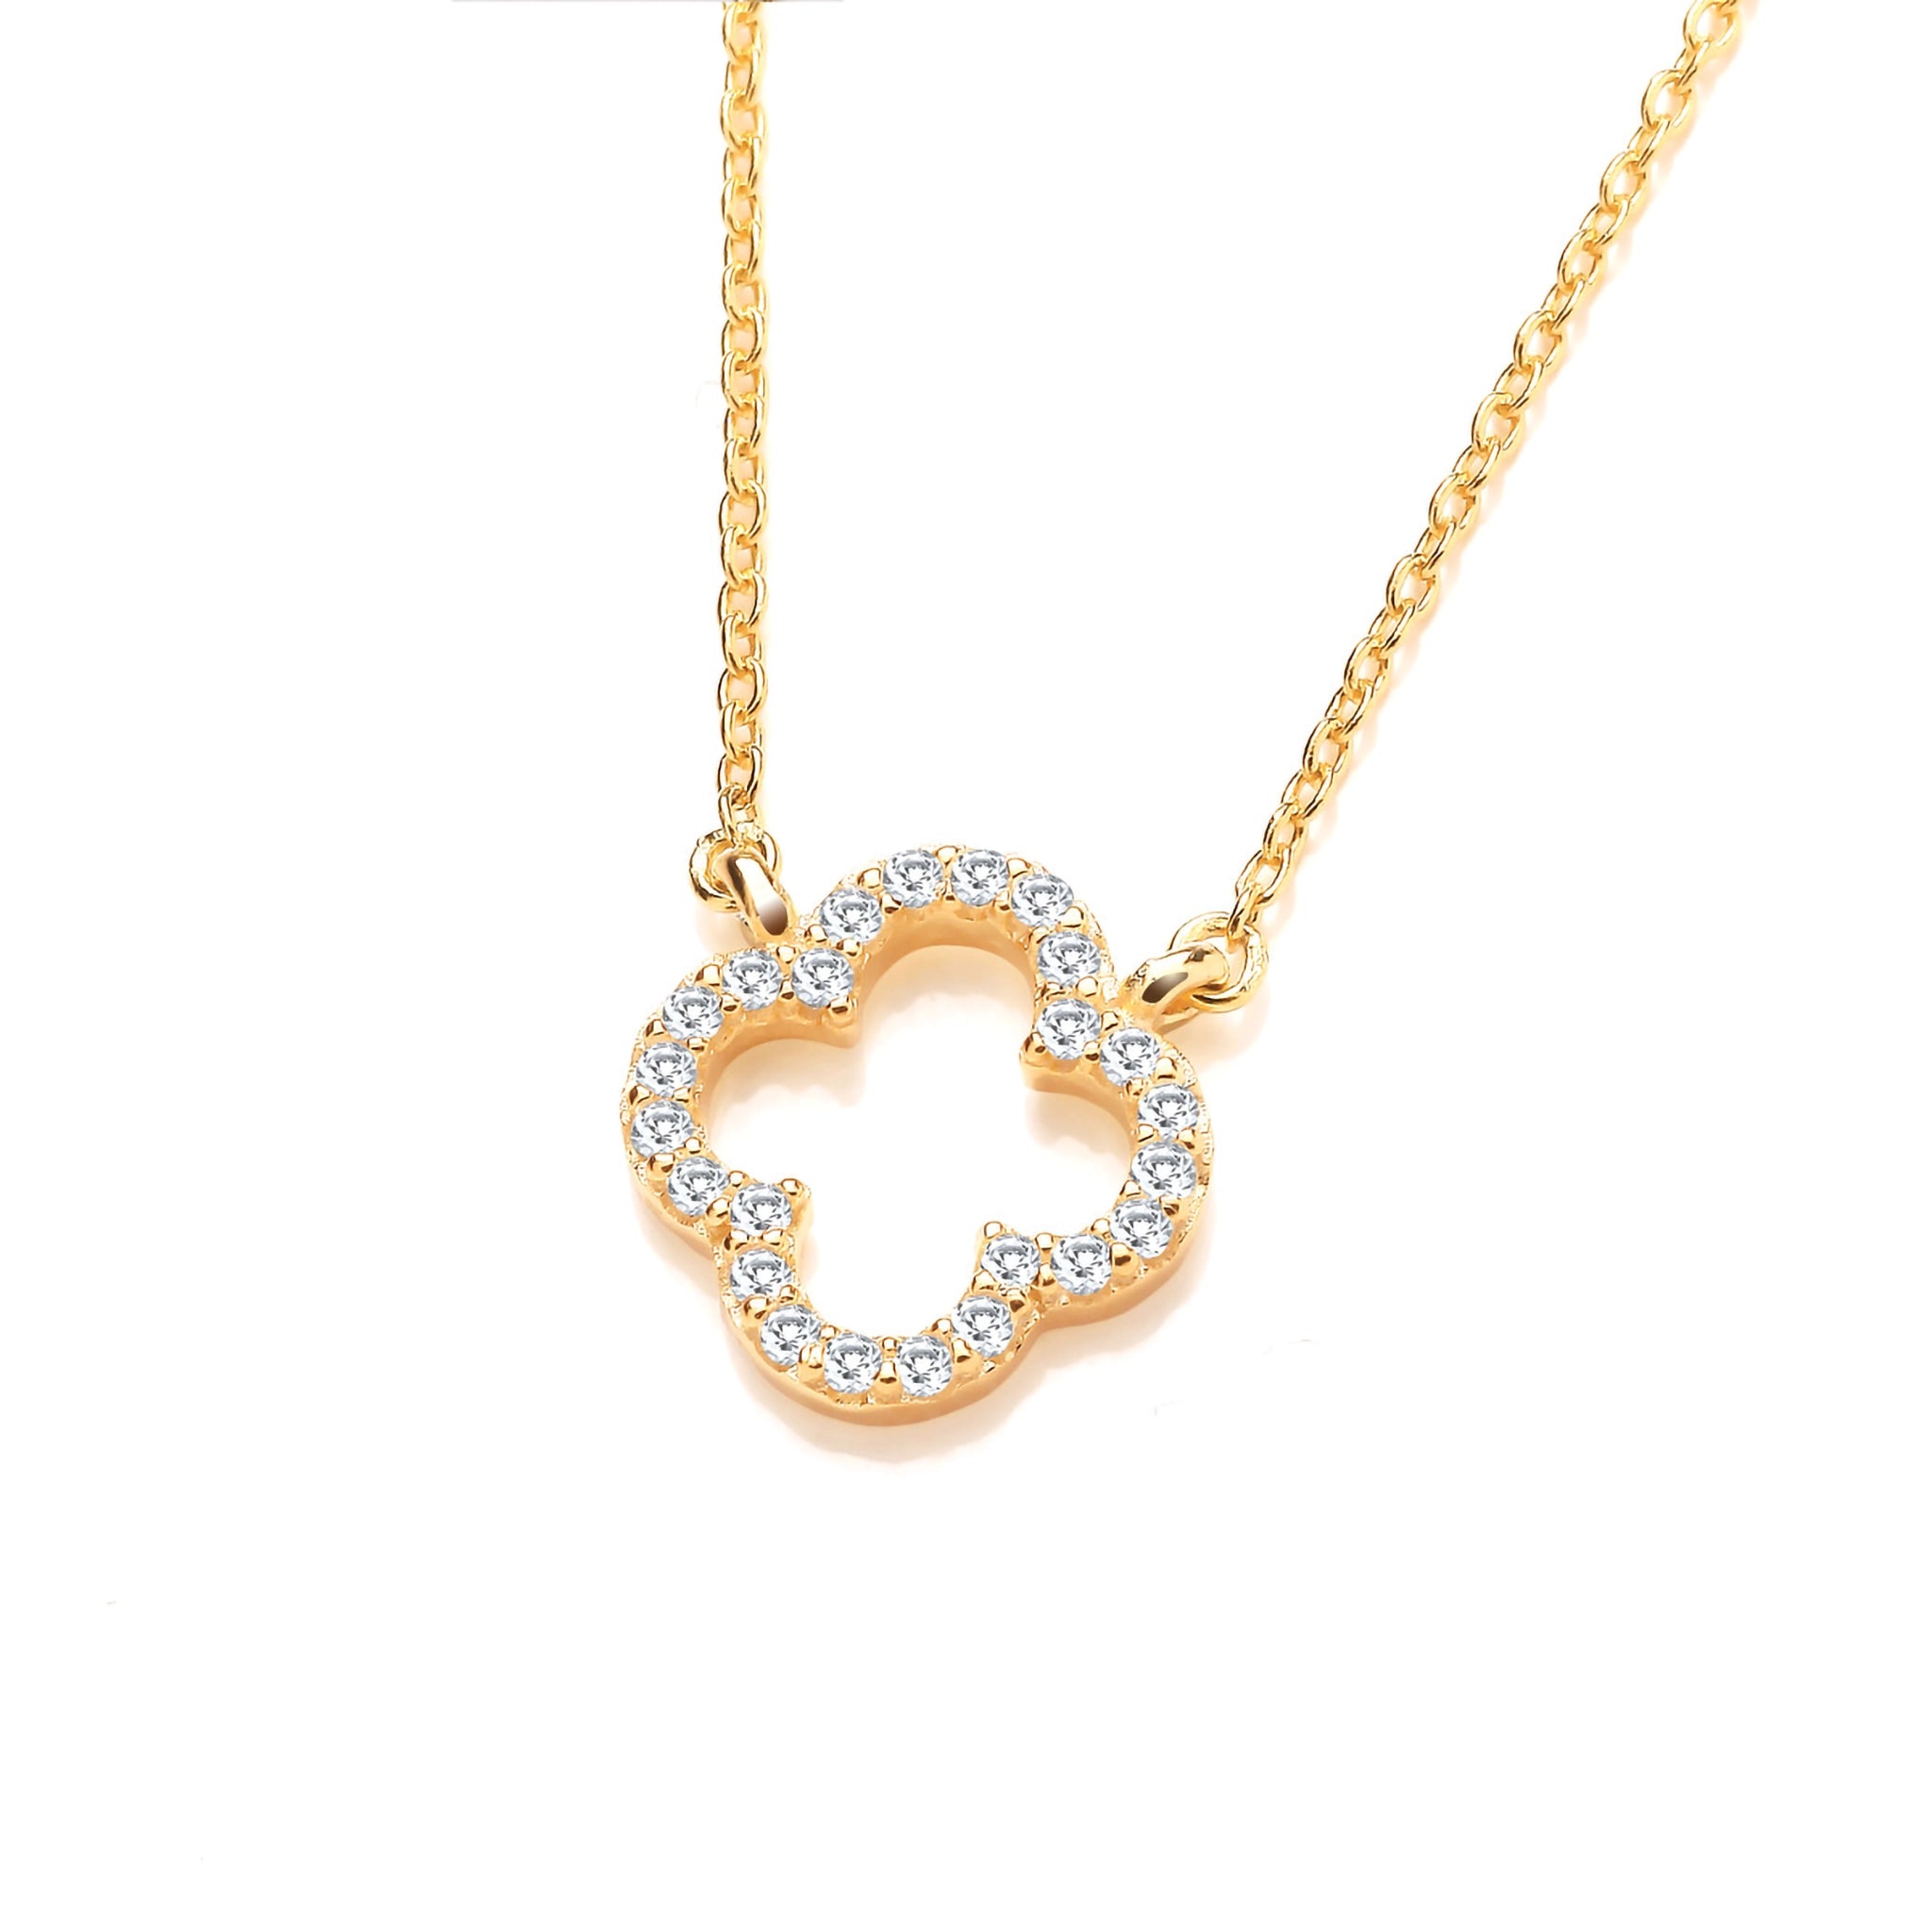 An open clover shaped gold necklace with cubic zirconia stones